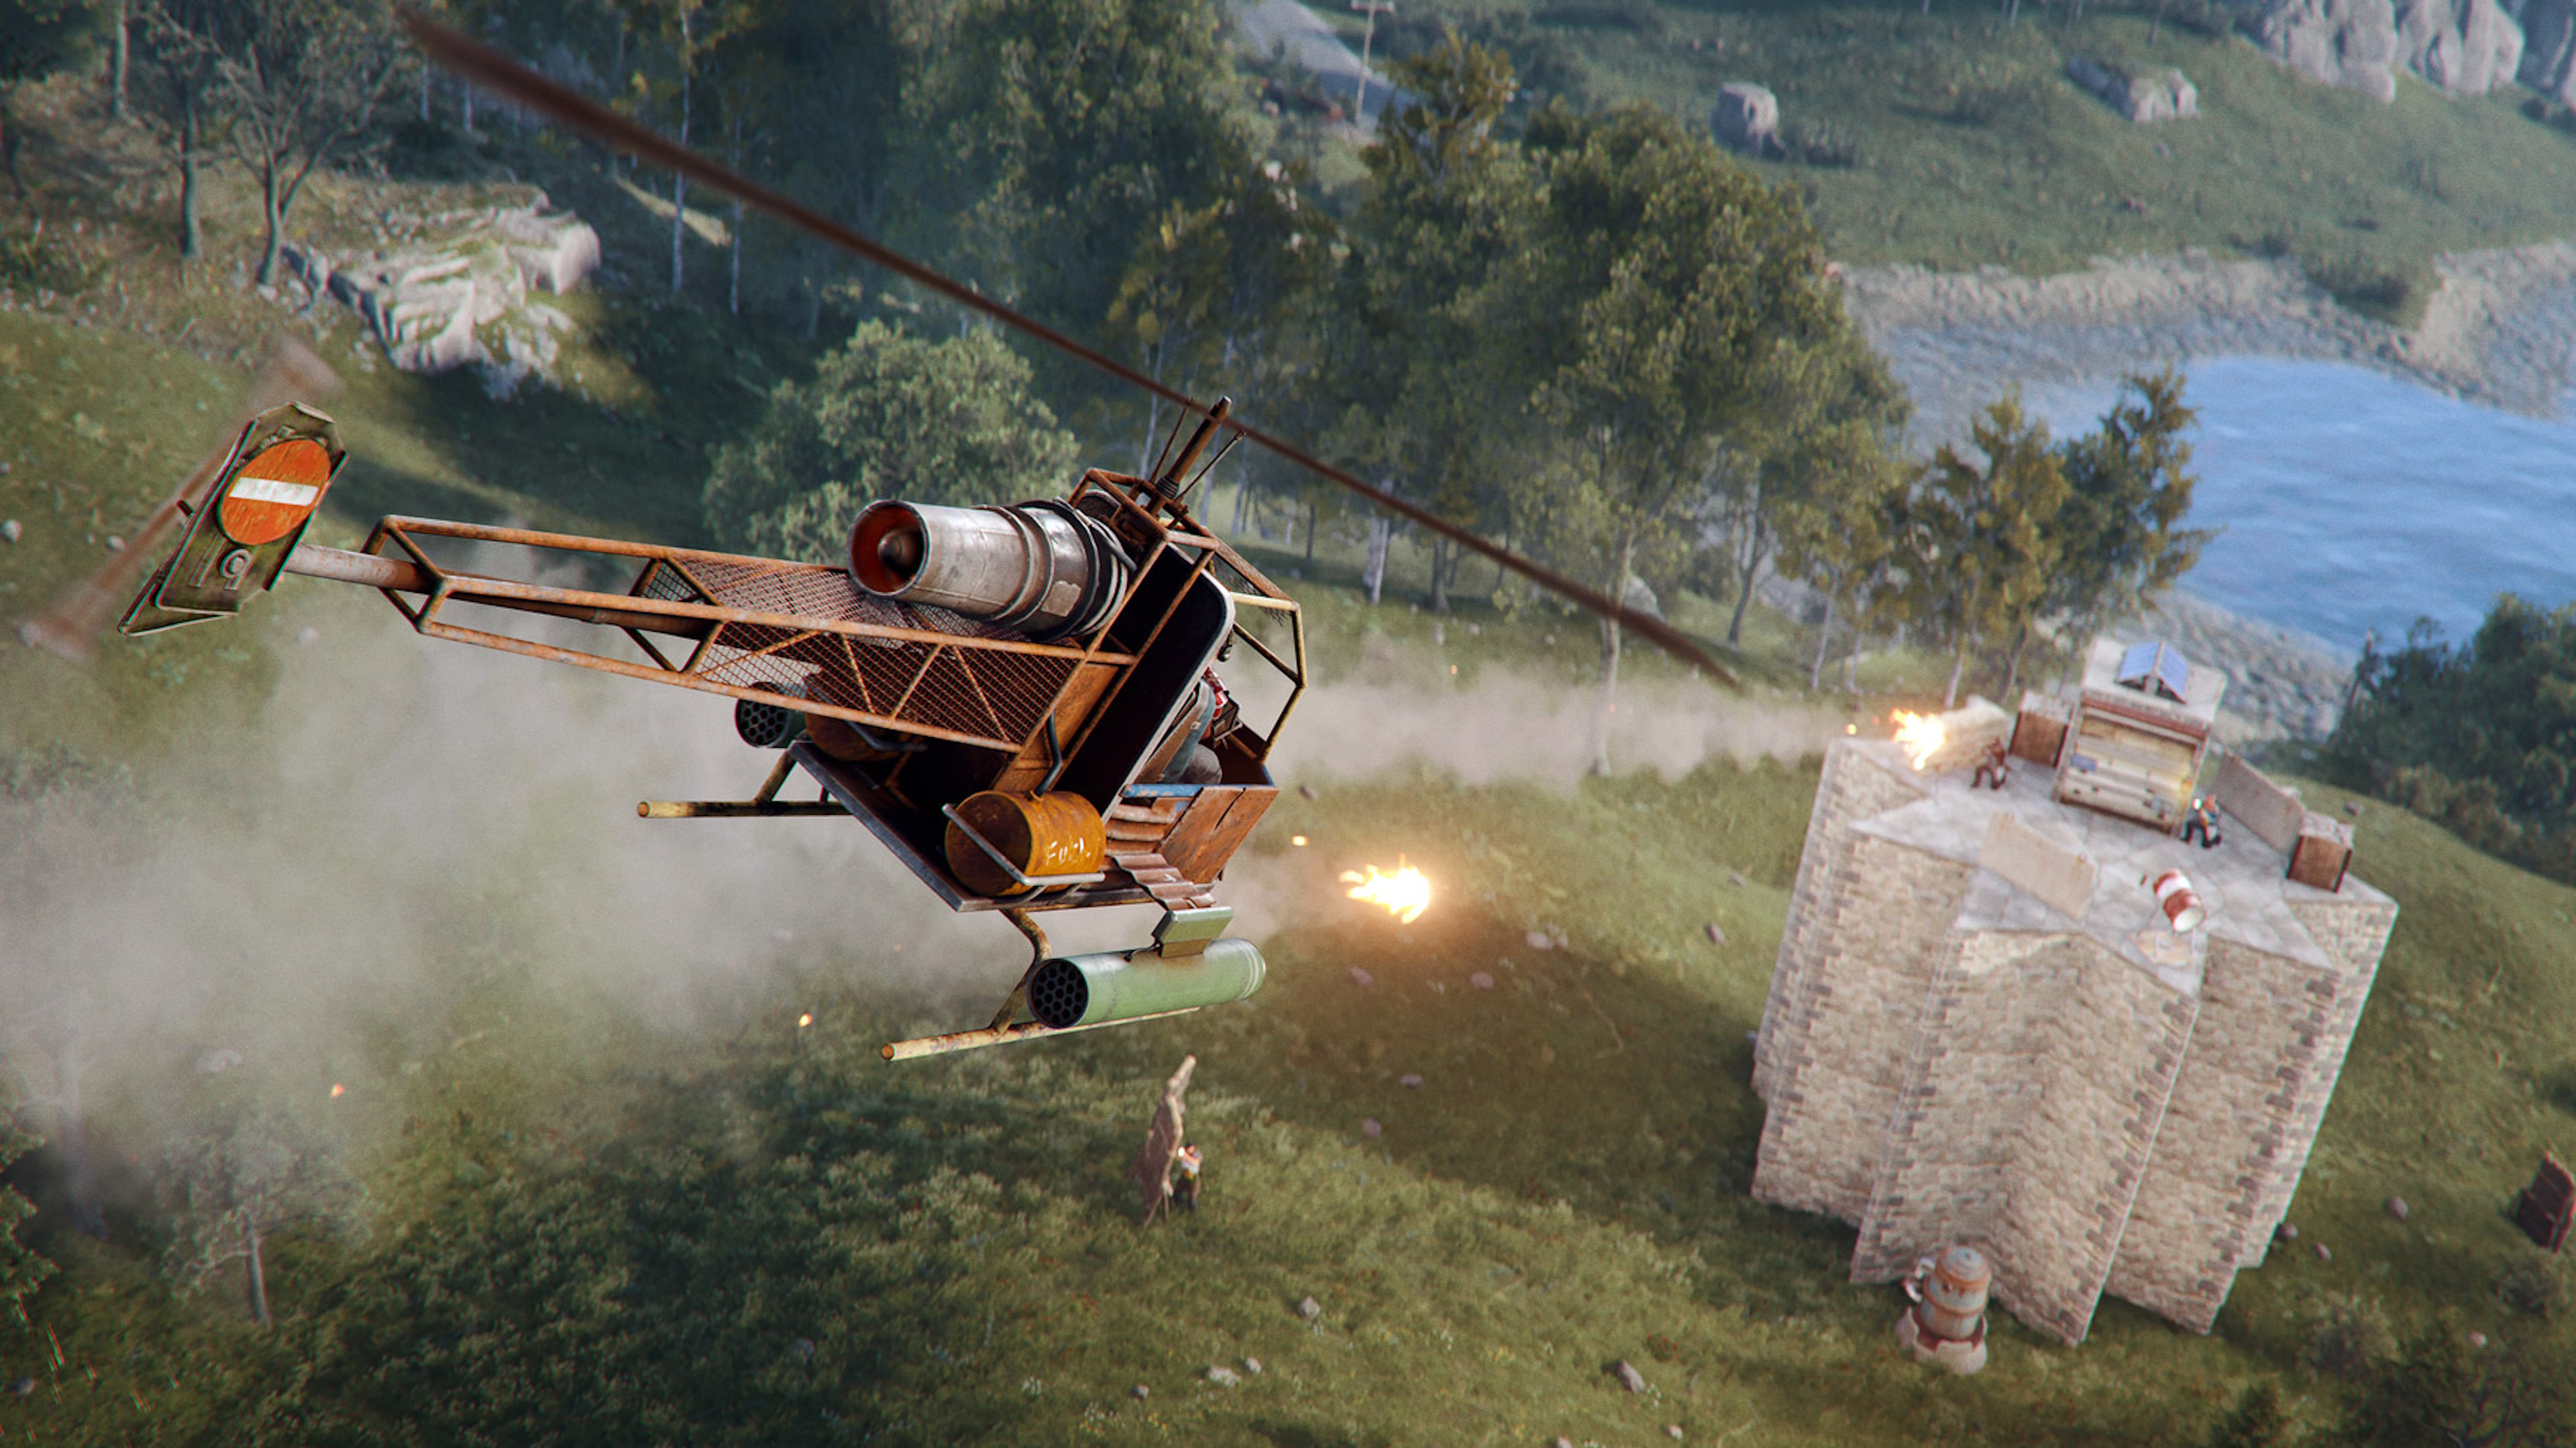  Rust adds attack helicopters, homing missiles to blow up attack helicopters, parachutes to escape exploding attack helicopters 